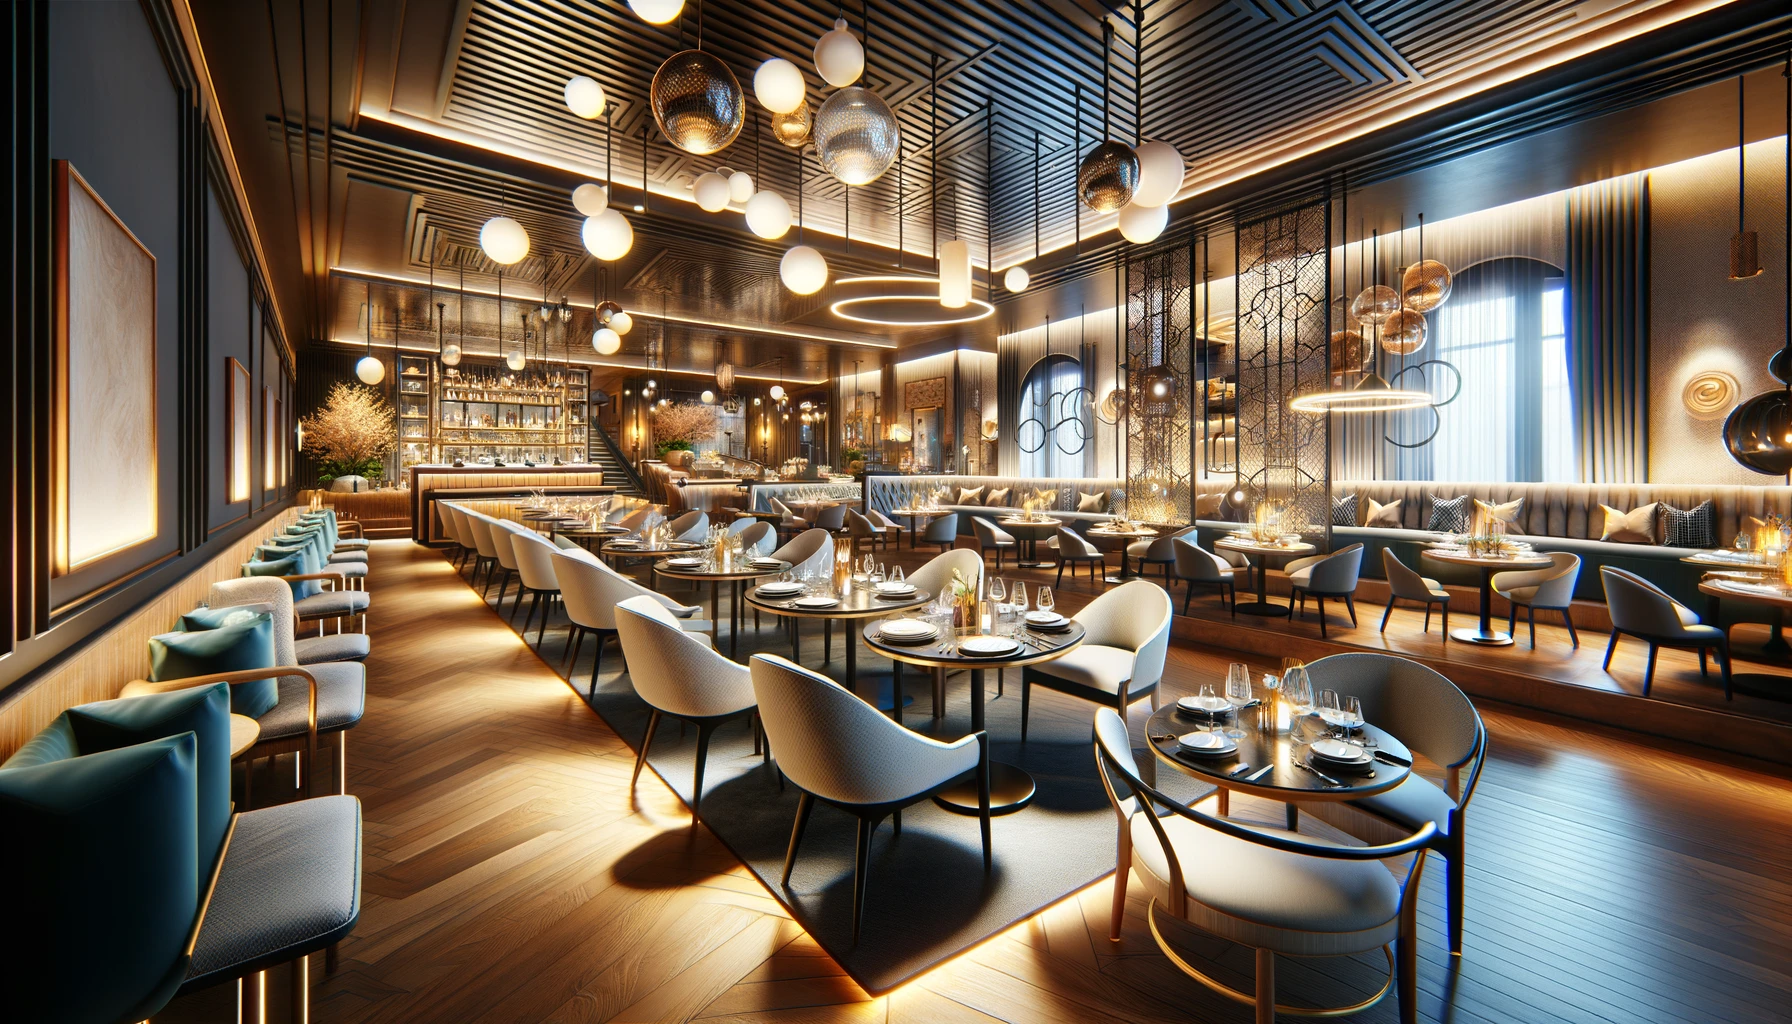 Chic and elegant restaurant interior, demonstrating the impact of decor on restaurant start up costs